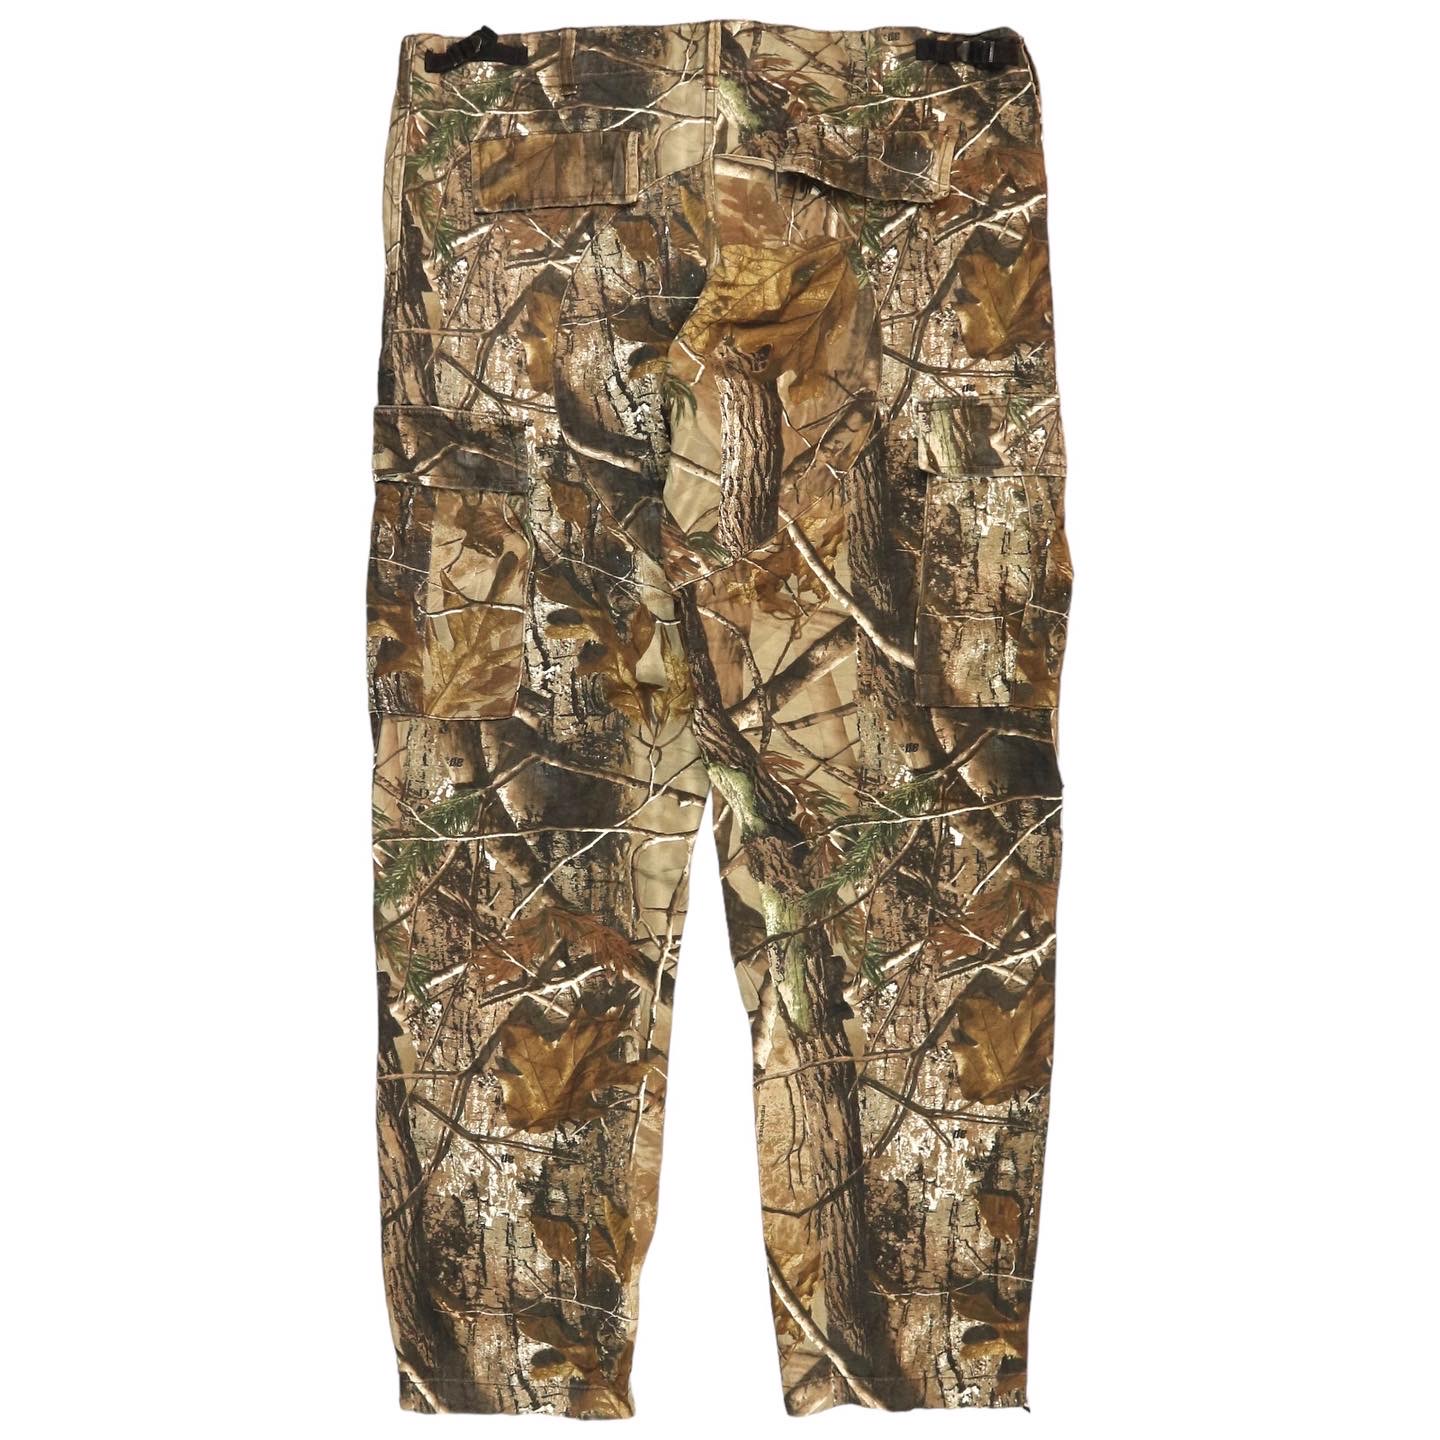 Red Head Realtree Hunting Pants Size 40